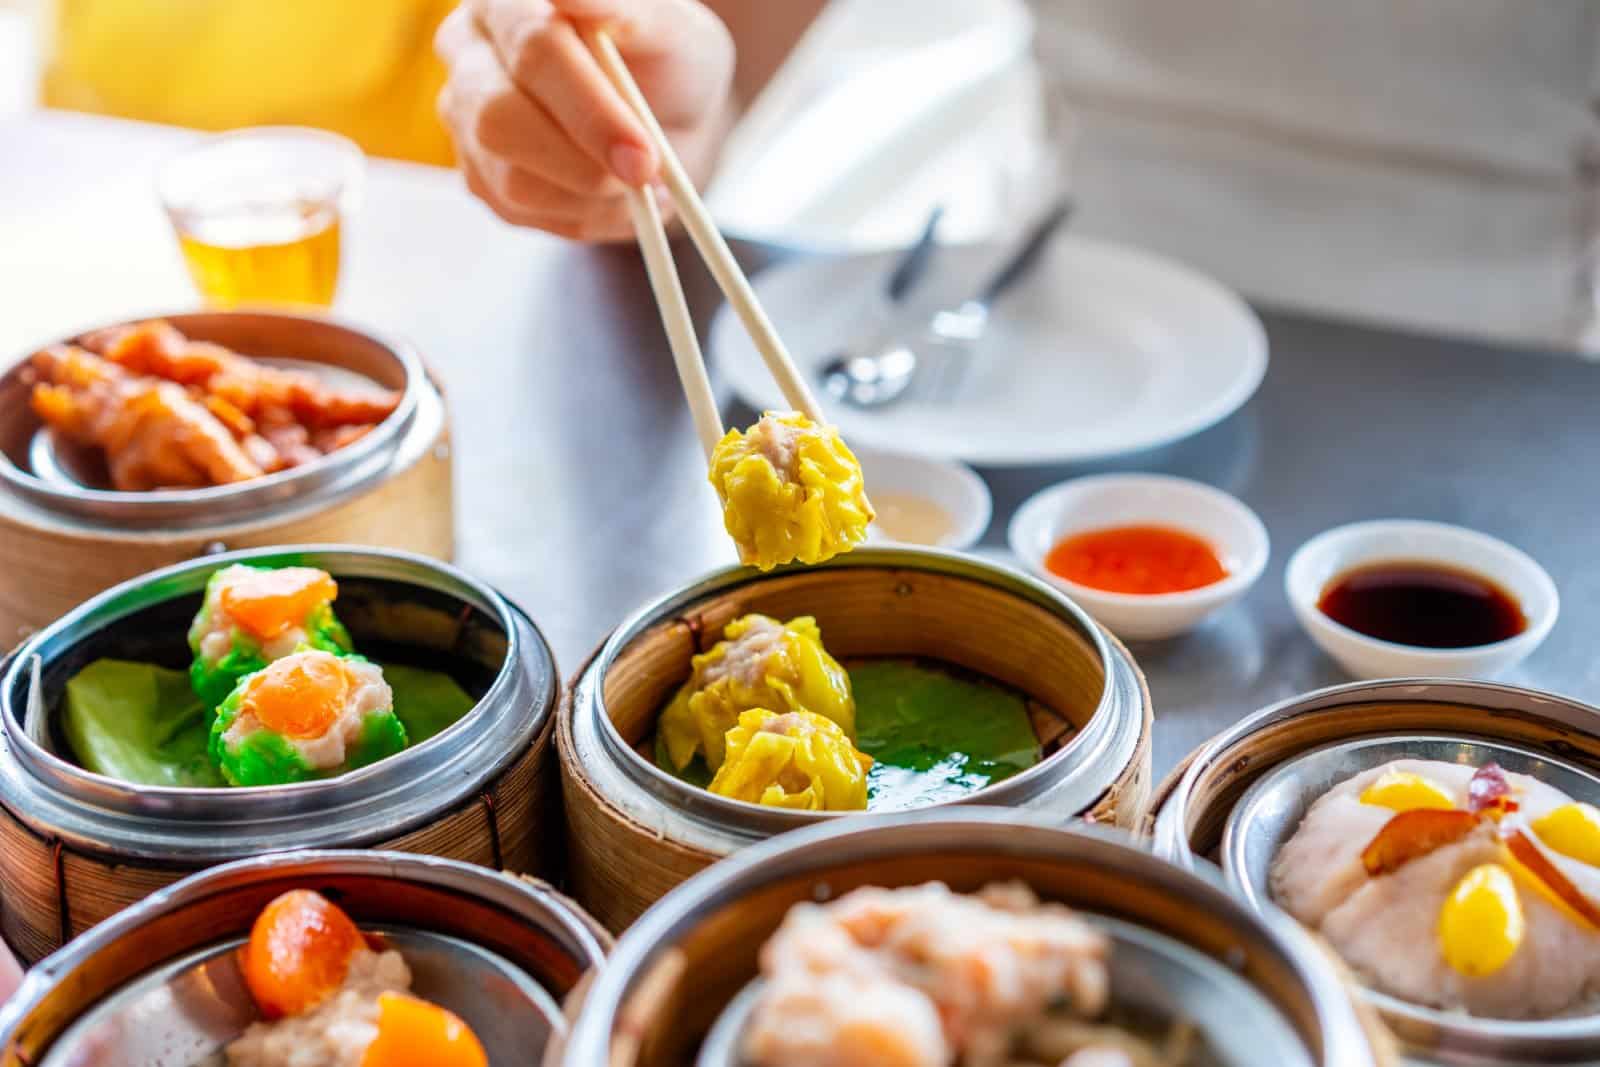 <p class="wp-caption-text">Image Credit: Shutterstock / kitzcorner</p>  <p>Hong Kong’s dim sum teahouses serve up delectable small bites starting at just HK$12 ($1.50) per dish. In contrast, a dim sum dining experience in a Western country can cost $5-$10 per dish.</p>